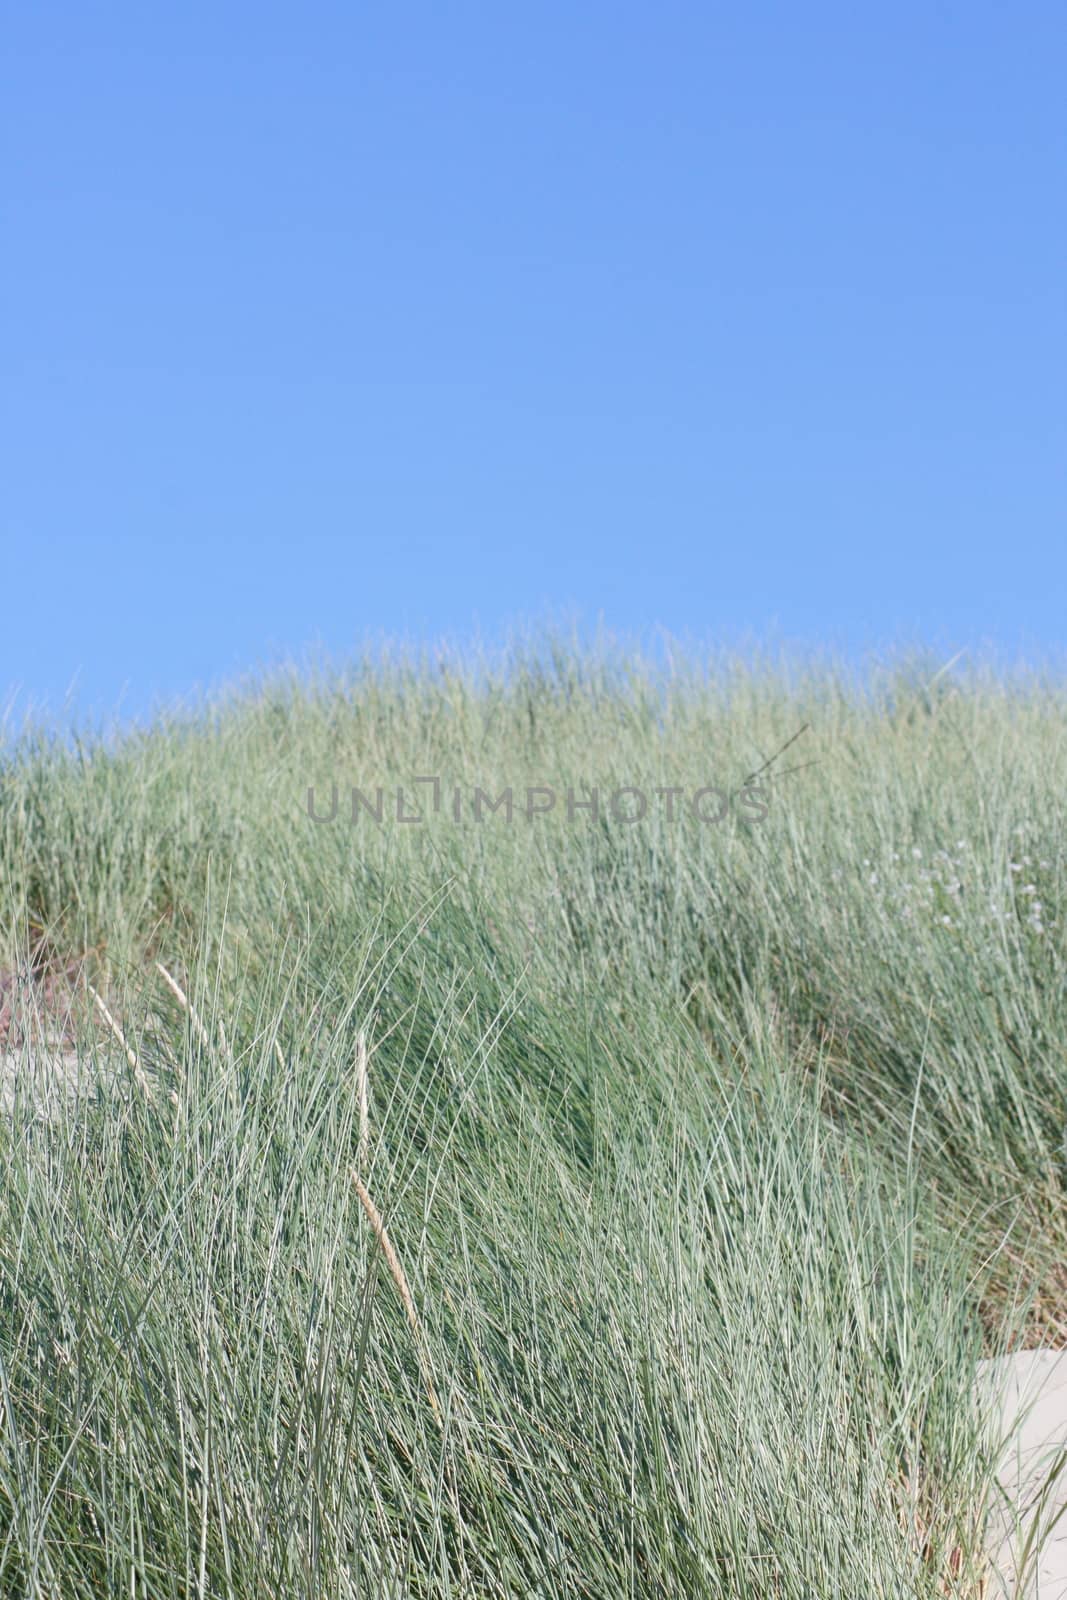 A dune, covered with beach grass